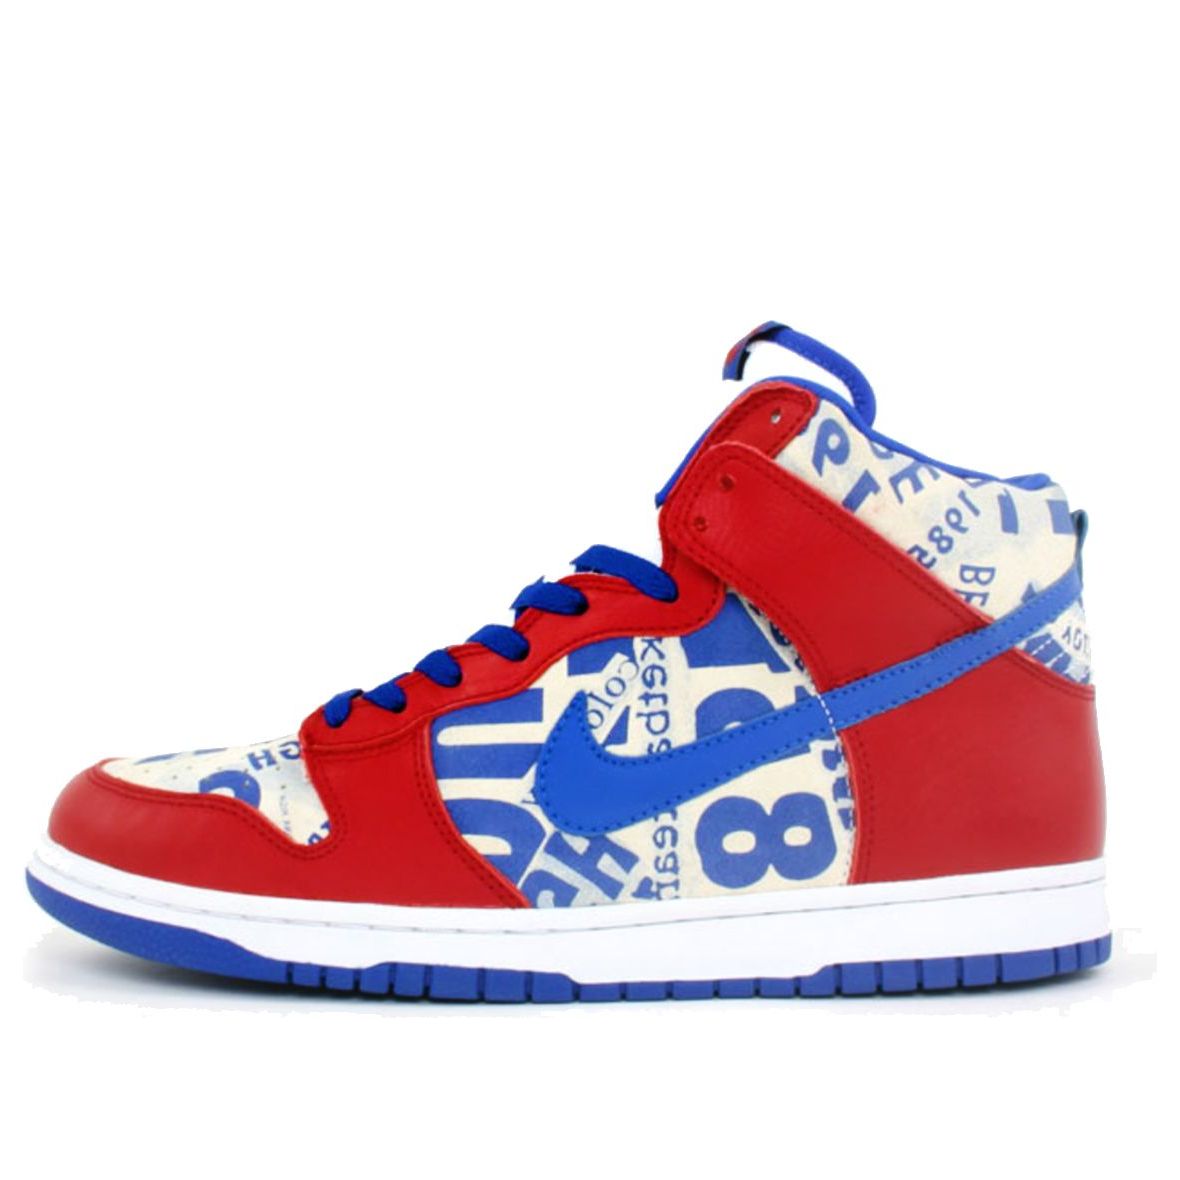 Nike Dunk High LTD 'Newspaper Pack Red White Blue' 308612-641 Iconic Trainers - Click Image to Close